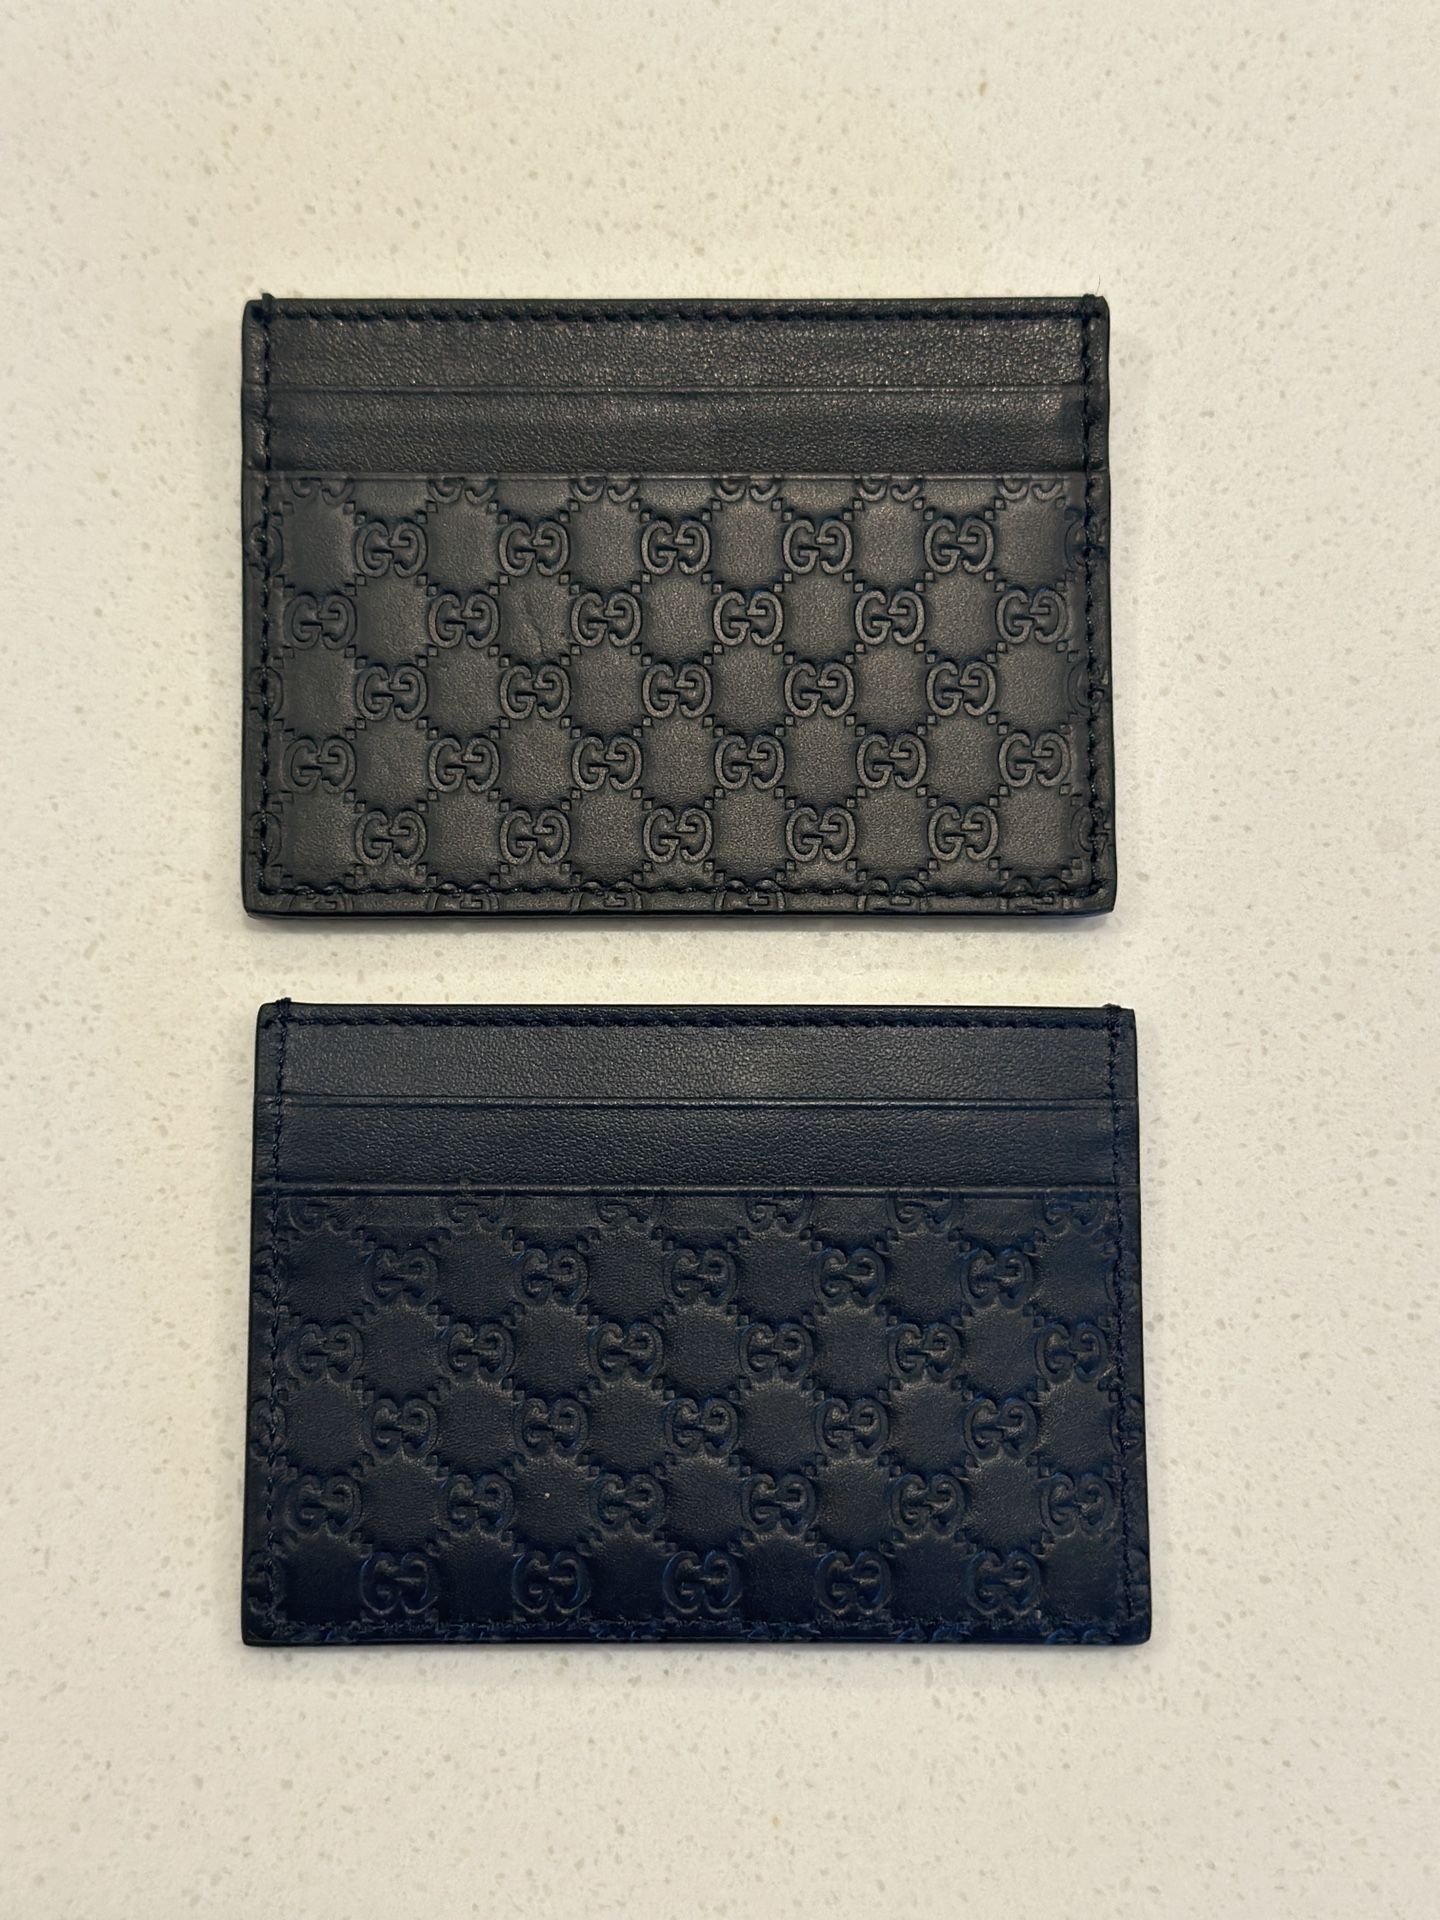 Authentic Gucci Cardholder Guccissima Leather - Black or Navy